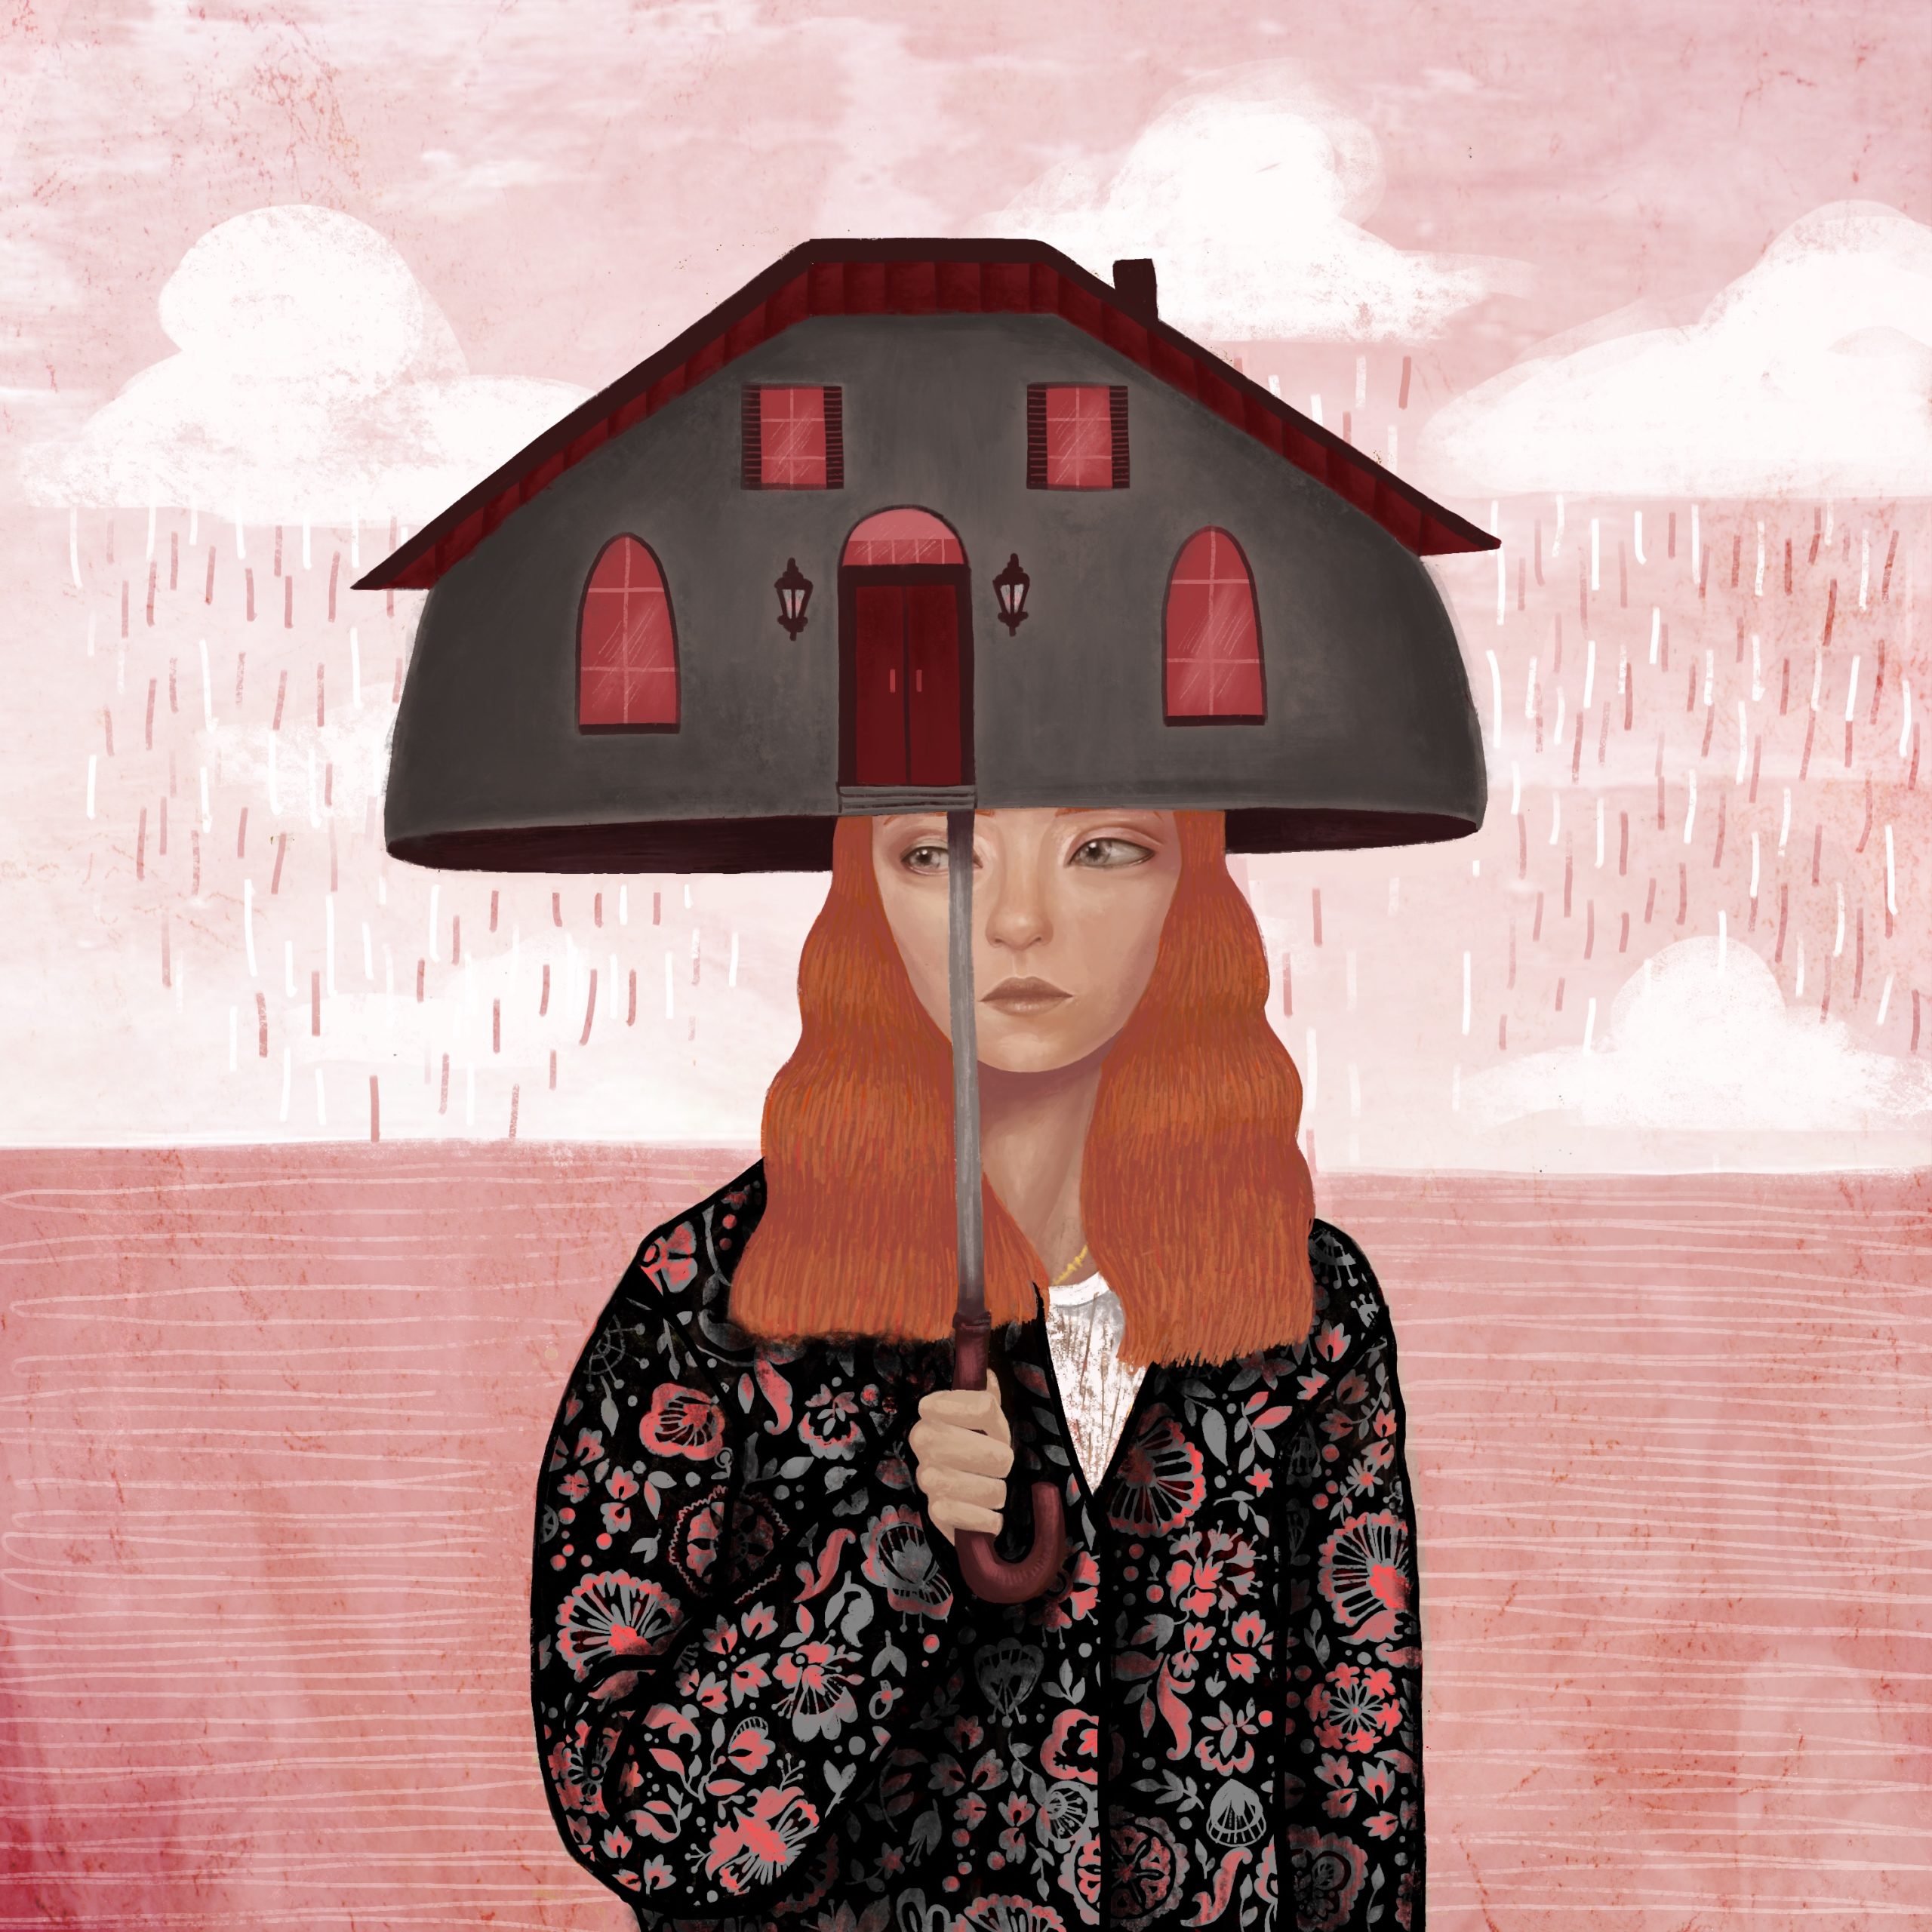 Her head was tucked beneath the floorless house, its shingles guardingher ginger mane from the pink rain falling above. The welcoming abode, made of bulging stone, rested securely atop a wooden handle. This was no ordinary house, this house was an umbrella. Or was the umbrella a house? She was no longer in a state of emergency. She was now safe.